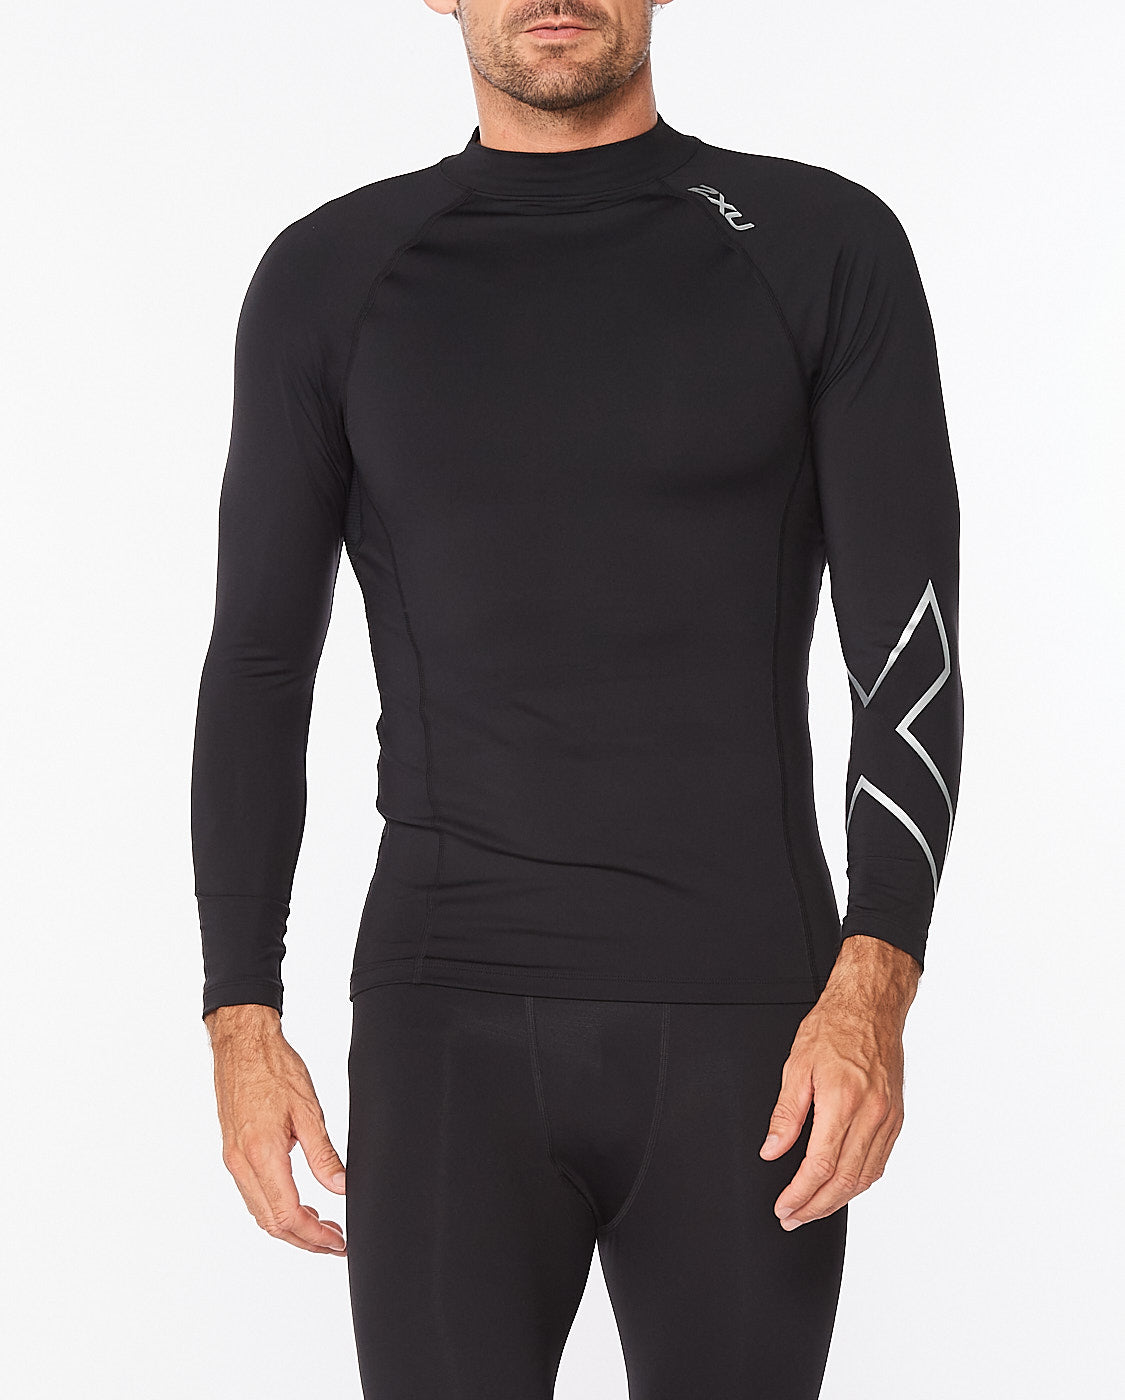 Ignition Compression Long Sleeve – 2XU US